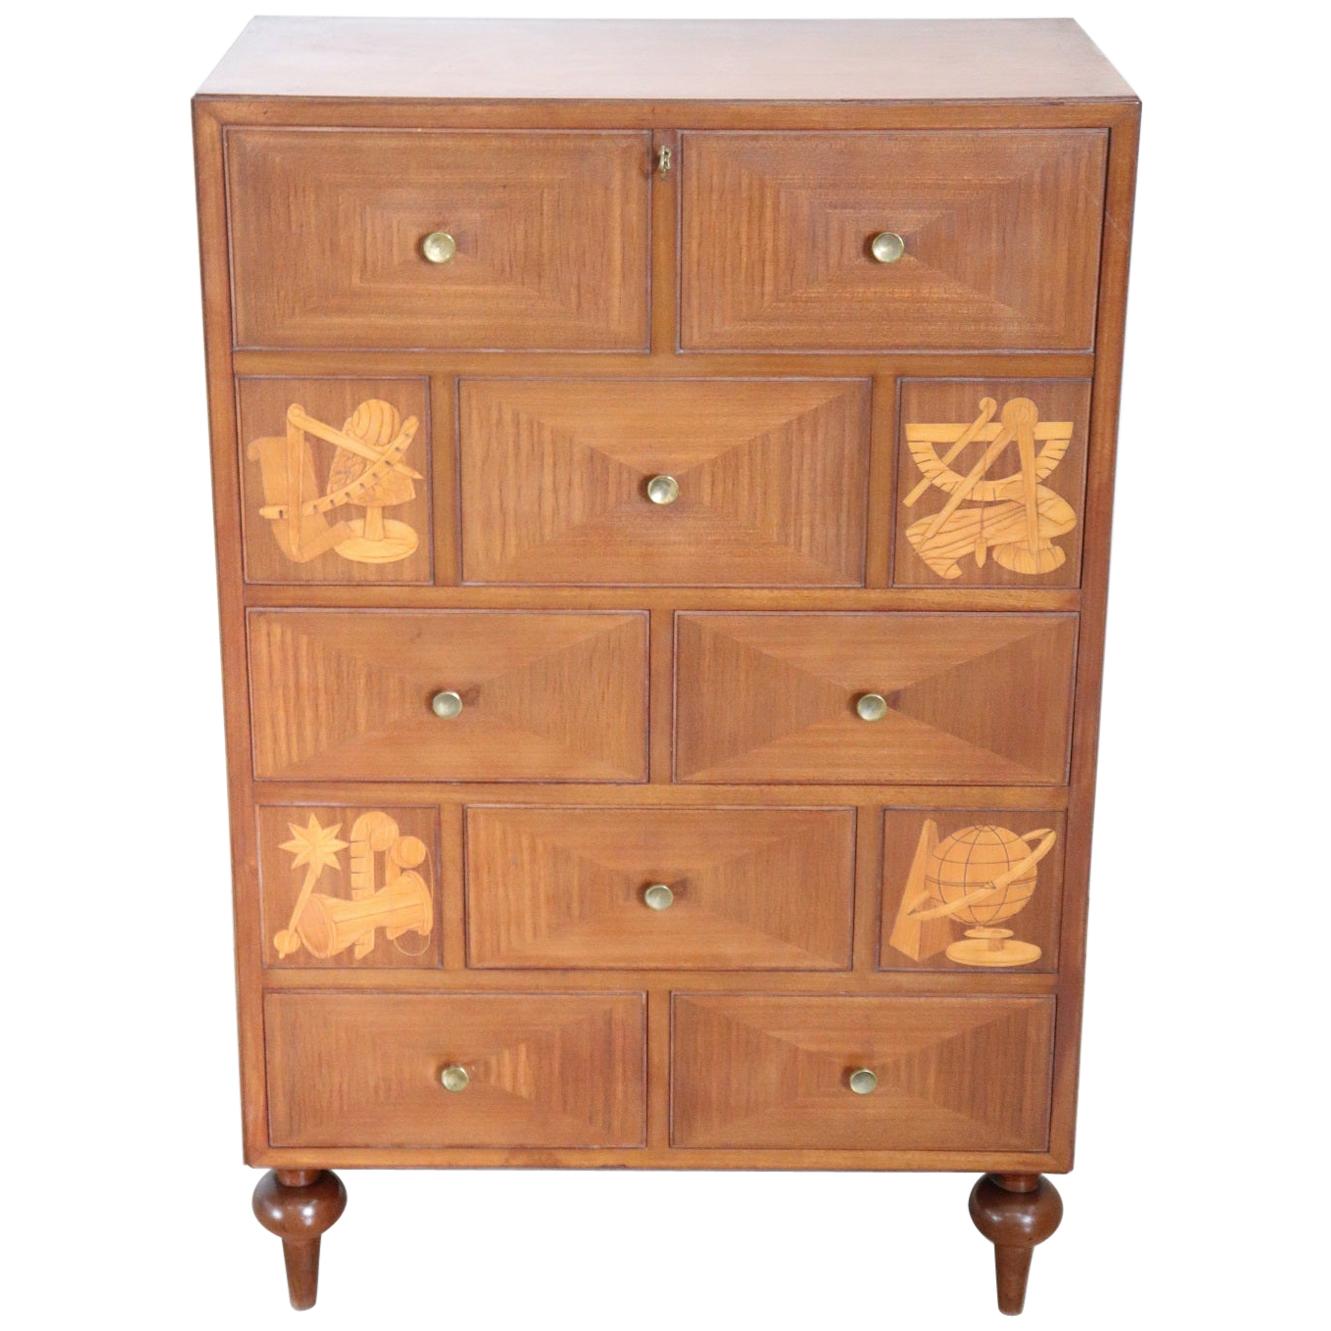 20th Century Italian Design Inlaid Mahogany Chest of Drawers with Secretaire